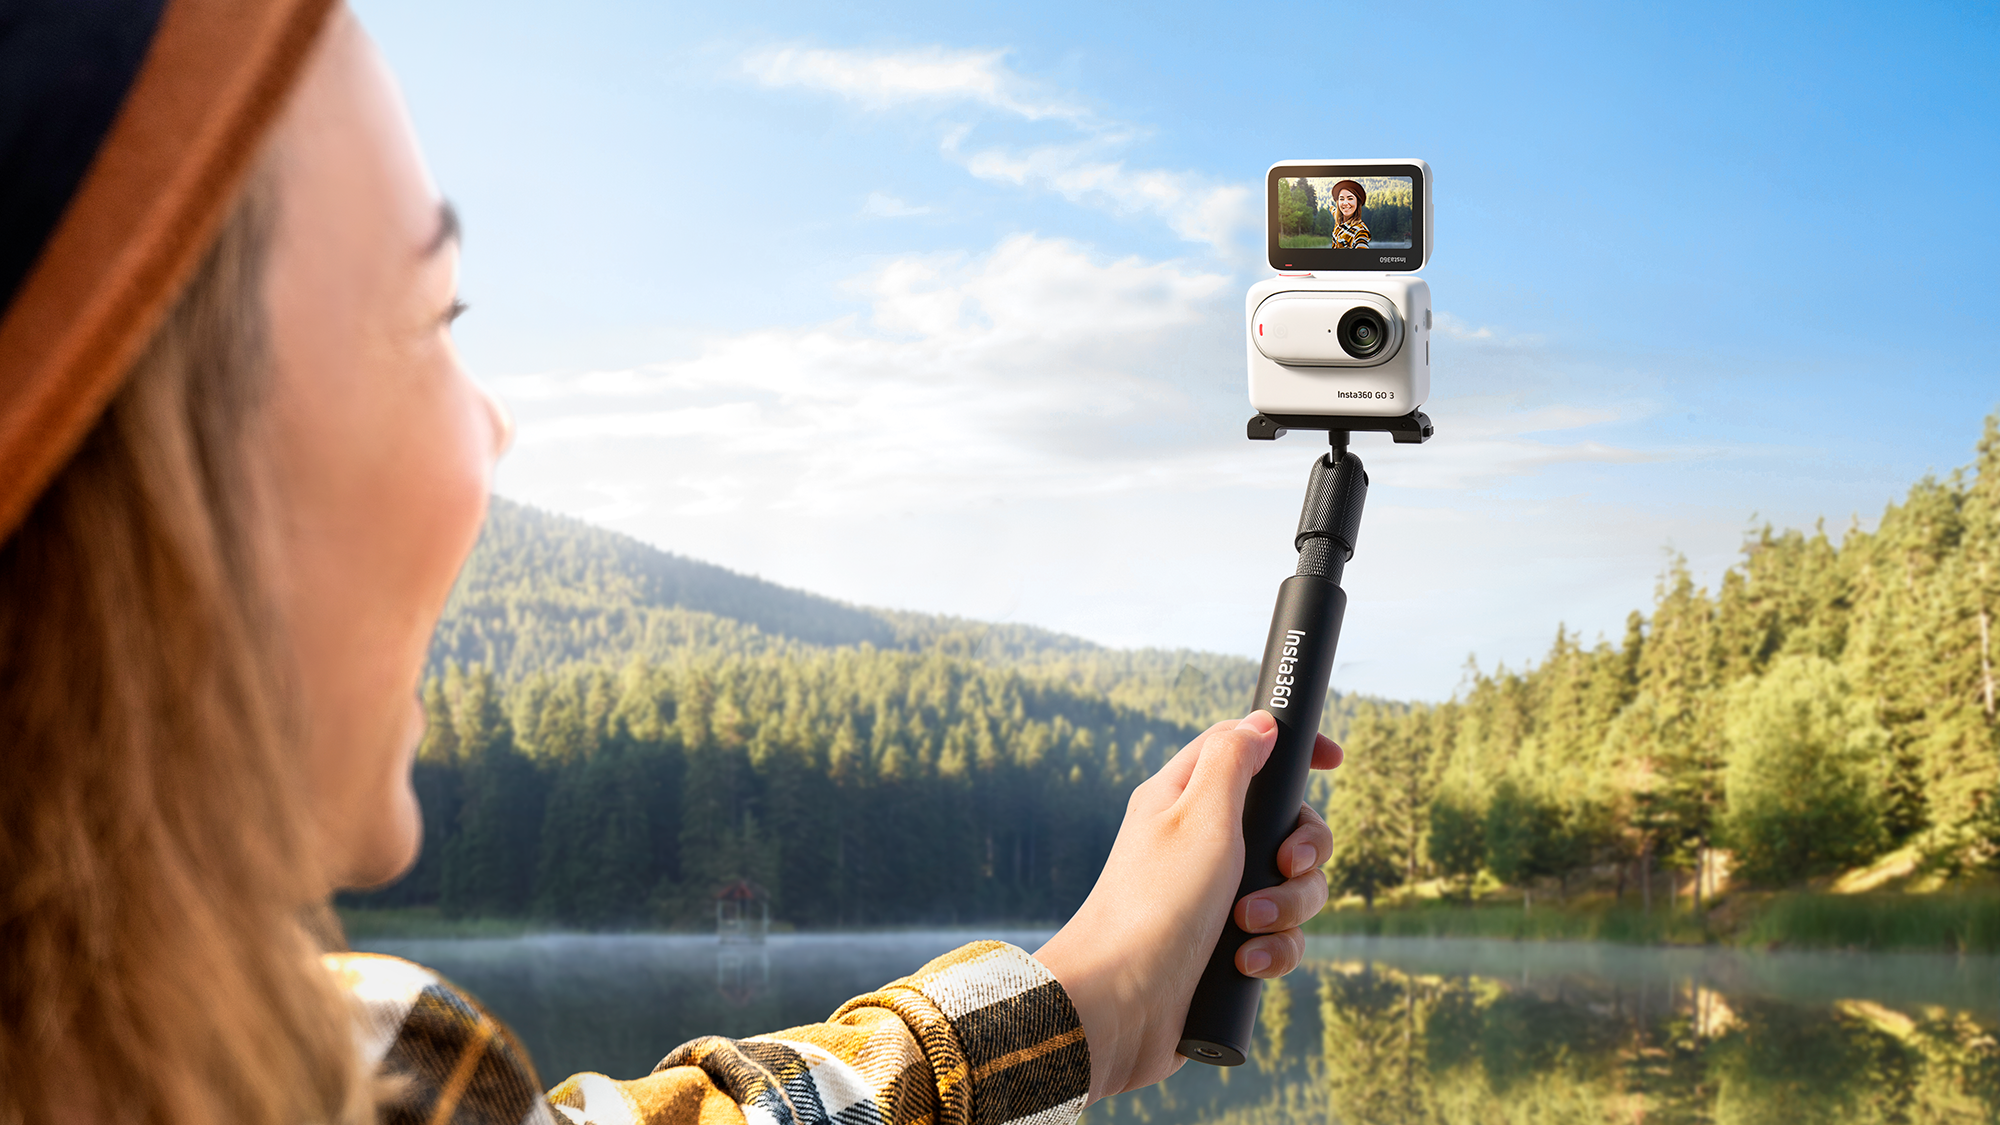 Monkey Tail is a flexible mount for Insta360 Go 2 or other action cams